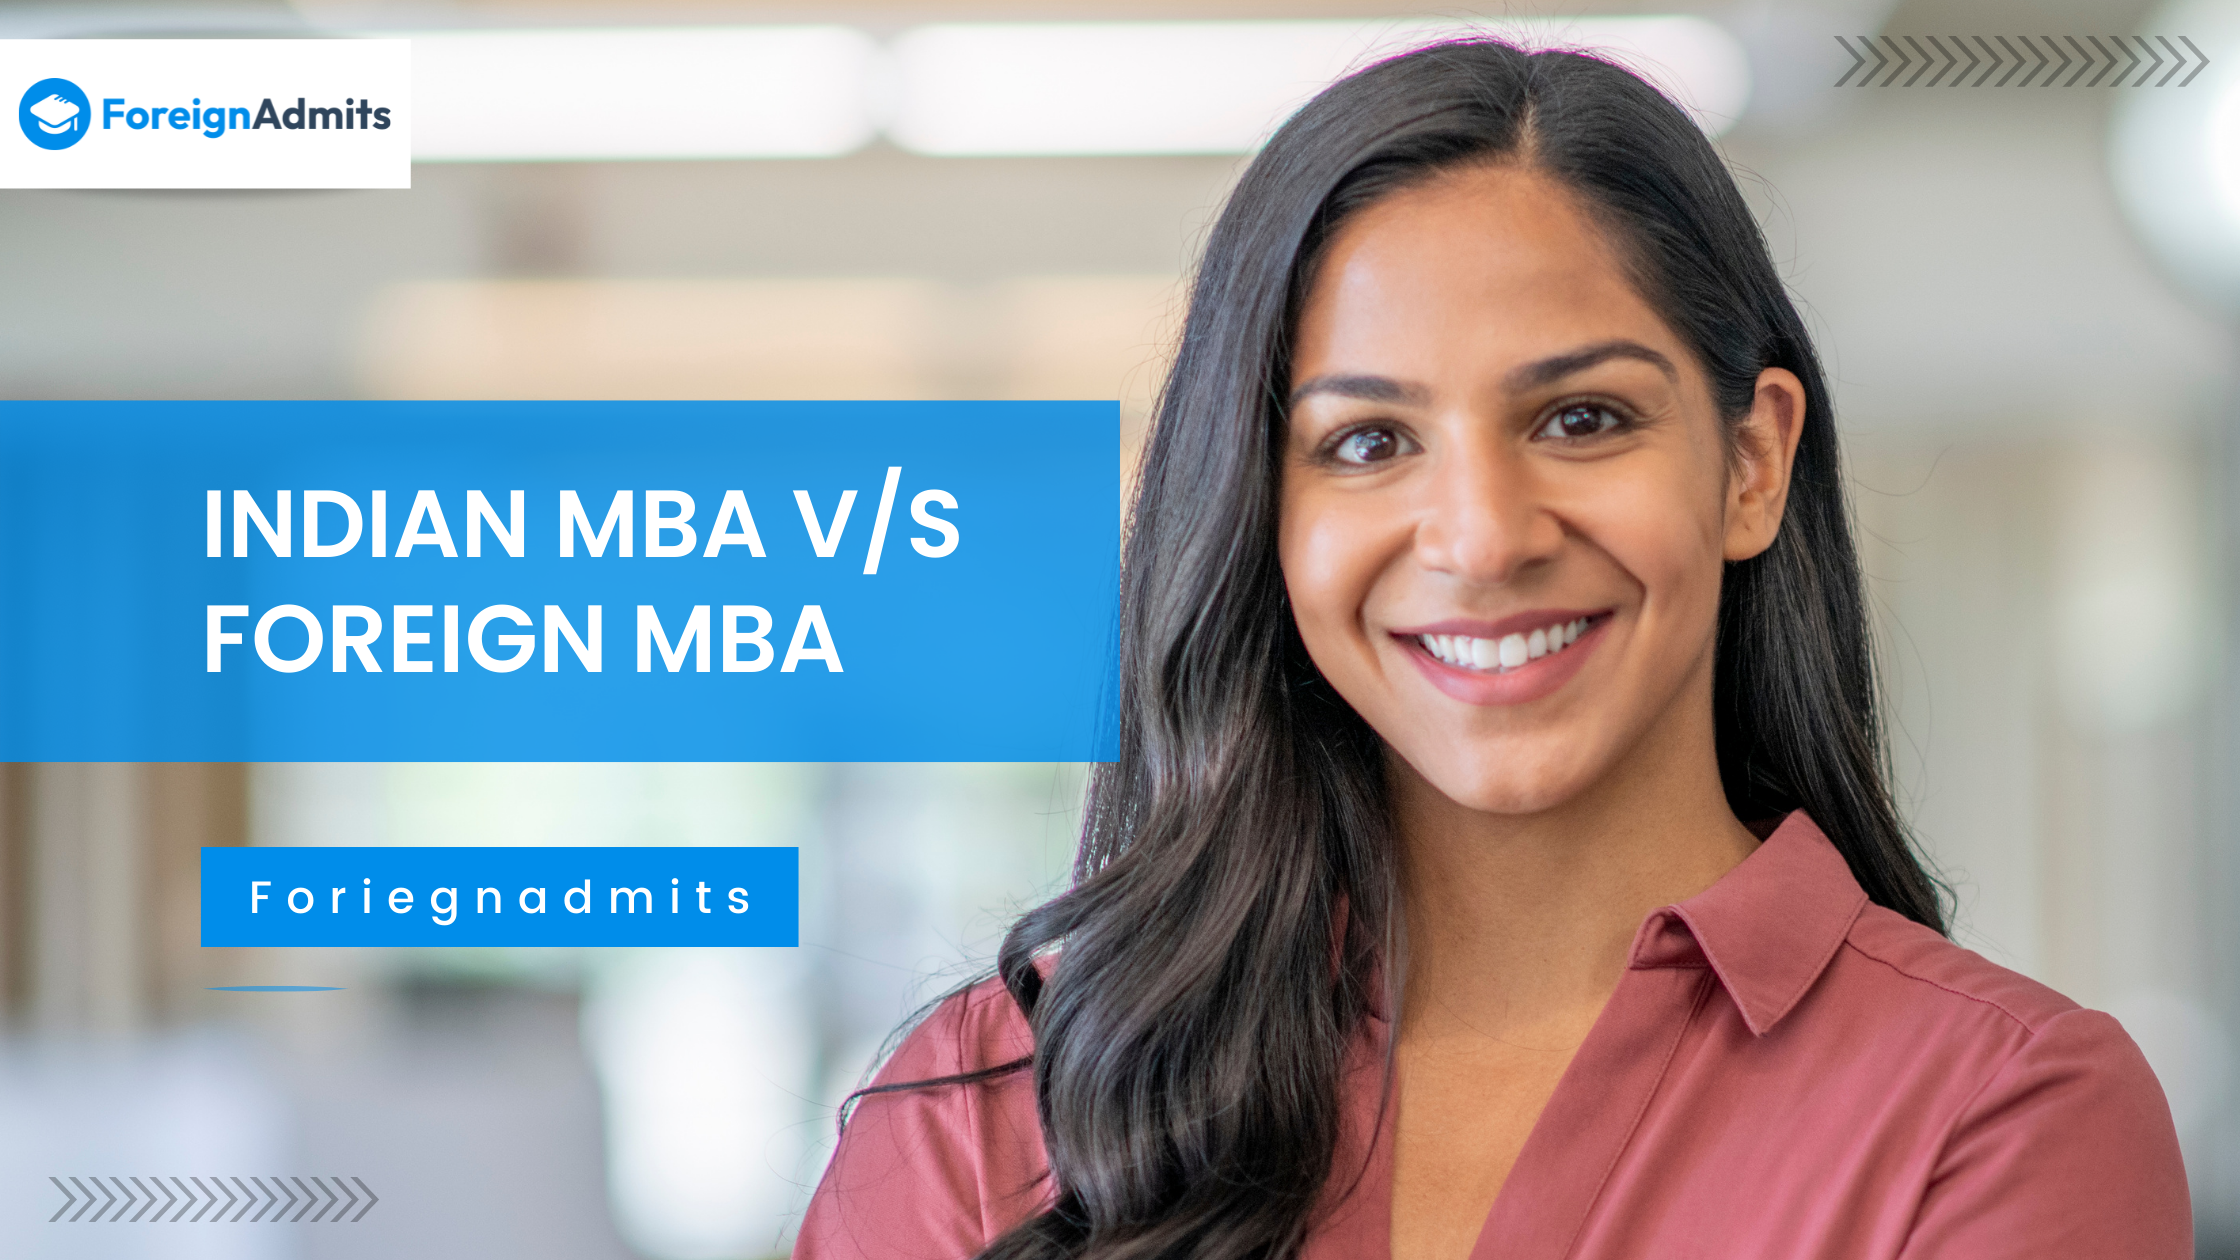 INDIAN MBA V/S FOREIGN MBA